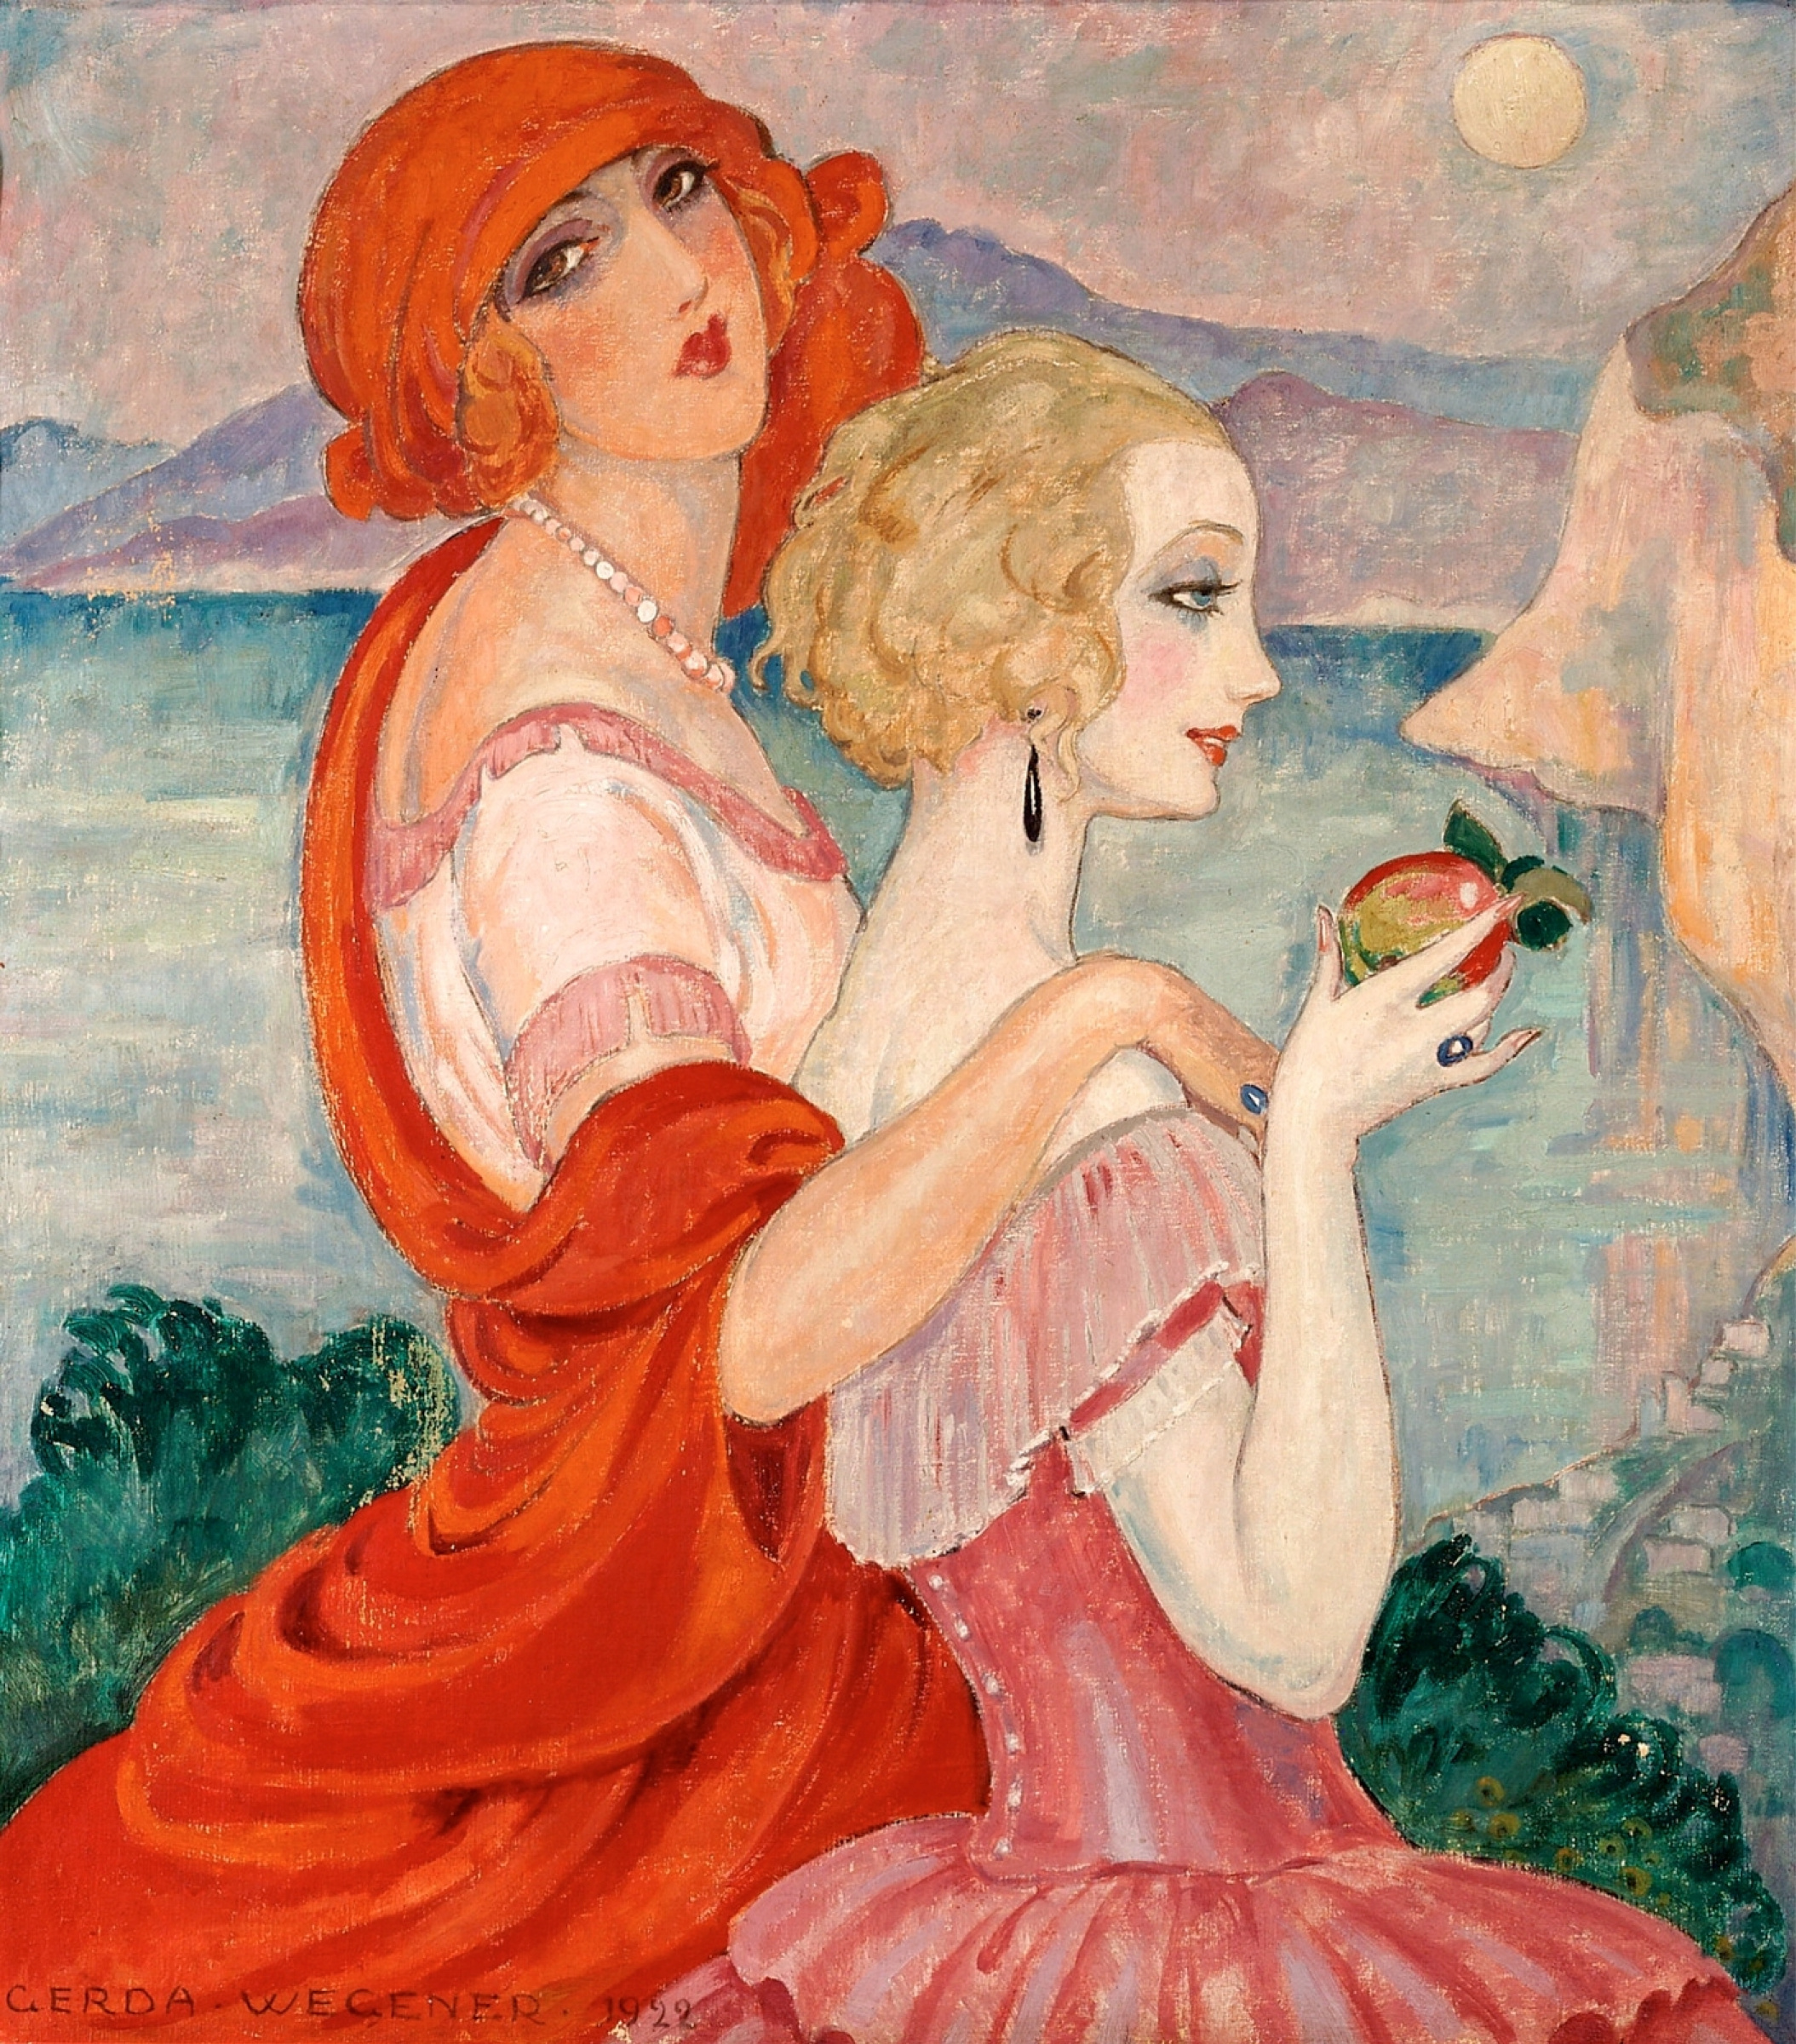 On the Way to Anacapri by Gerda Wegener - 1922 private collection